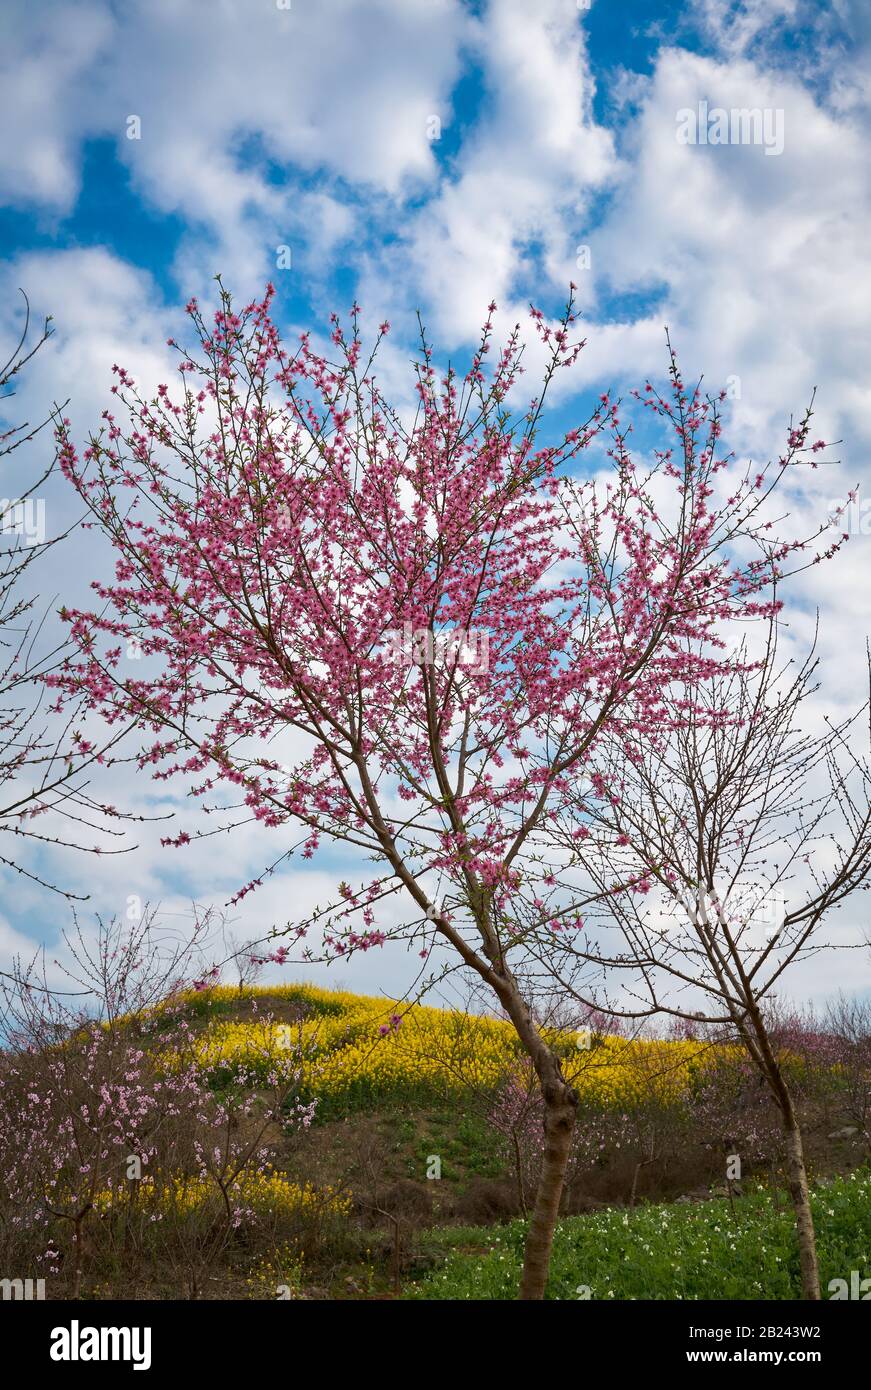 Spring in the Asia is beautiful blue sky with pink sakura or cherry blossom and filled mountain with yellow mustards flower. Stock Photo